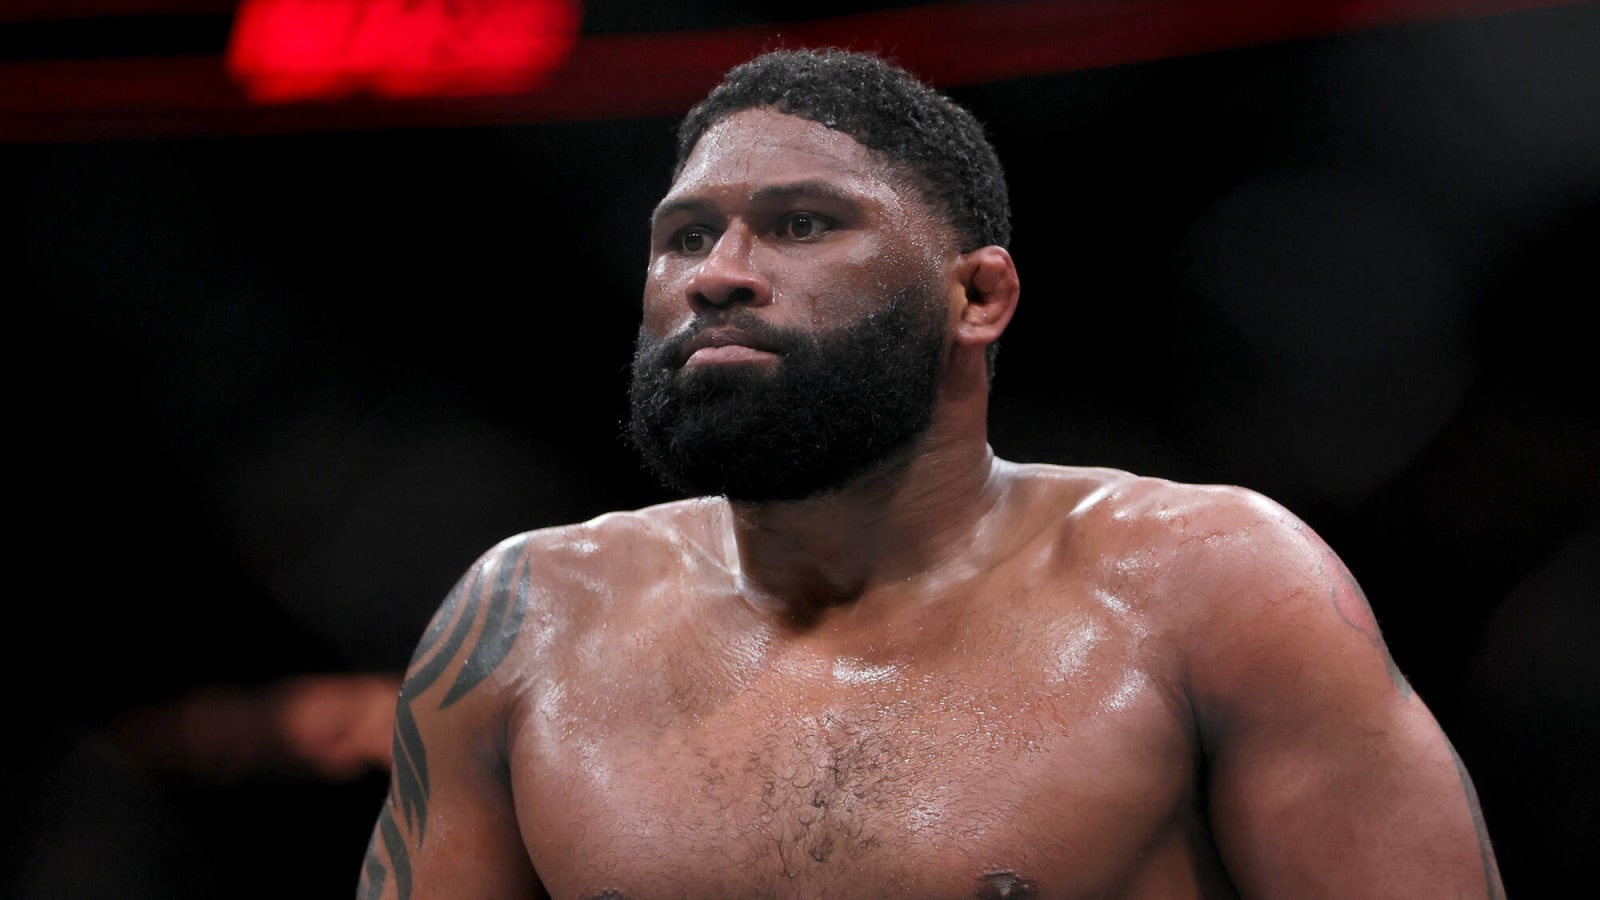 Curtis Blaydes dismisses Jon Jones as champion and claims he’s fighting Tom Aspinall for ‘real belt’